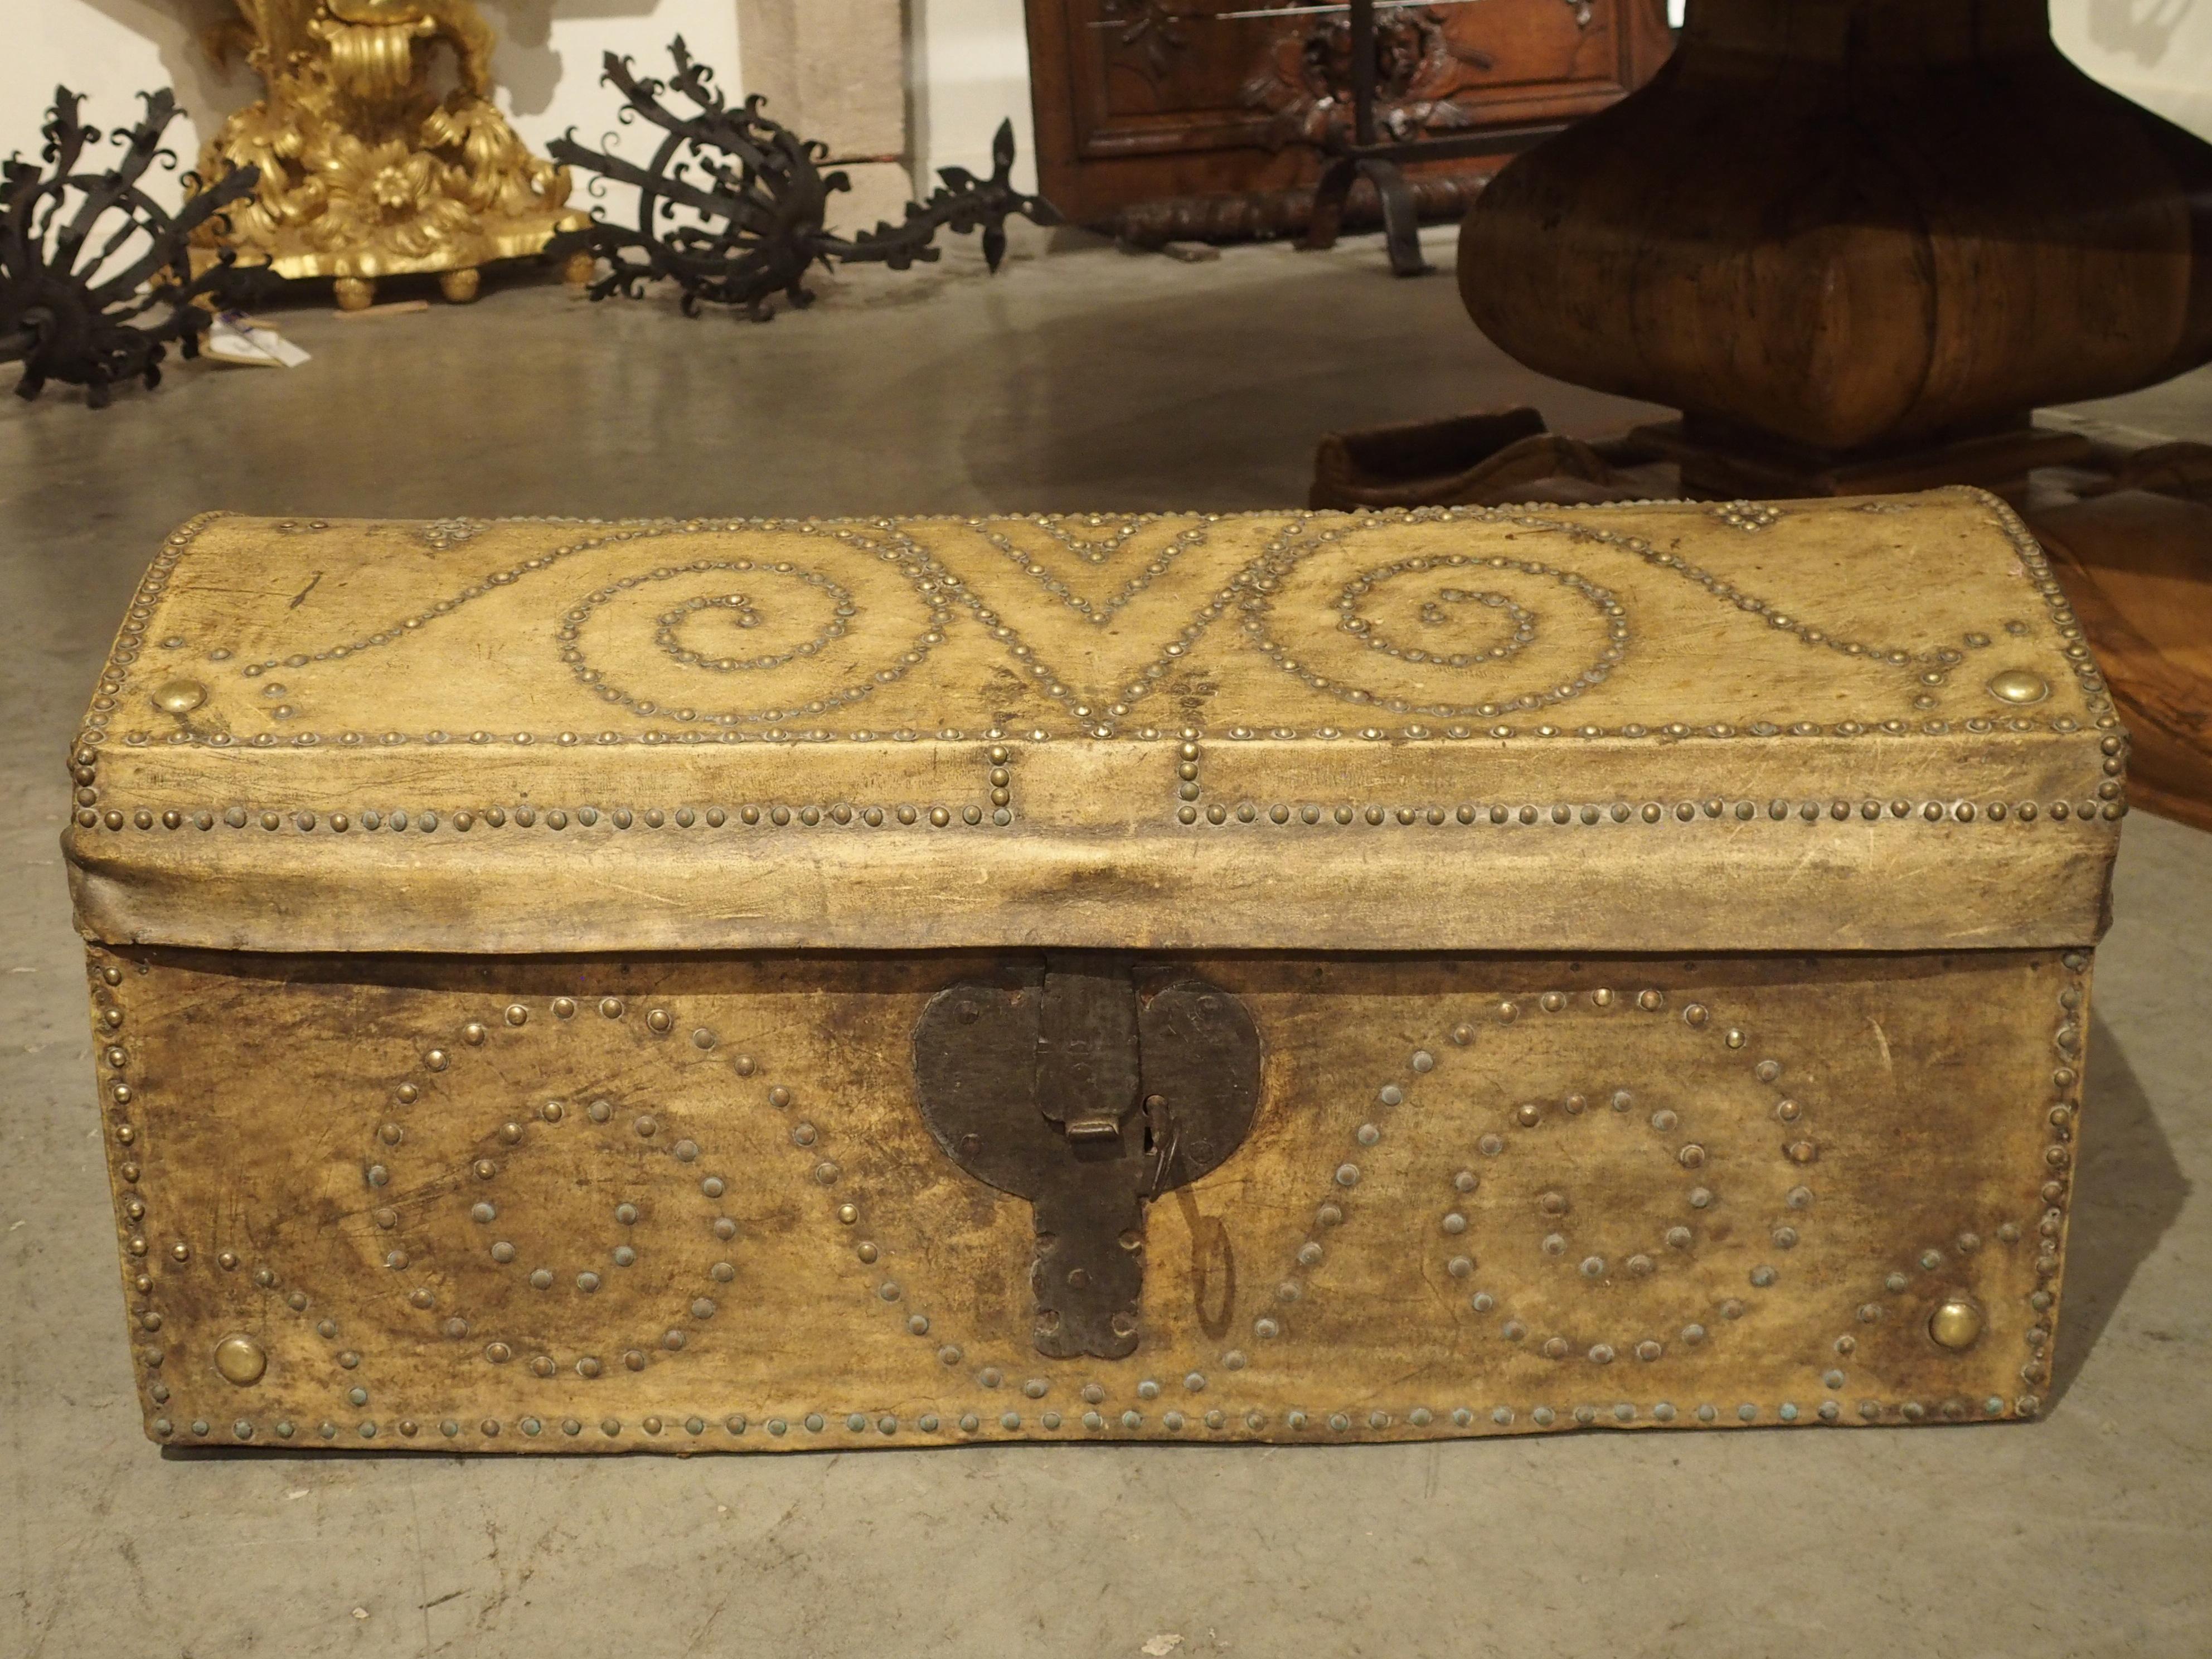 This unique leather and brass studded arcon, or Spanish trunk, is from the 1800’s and has been lined with a foliate fabric. The natural leather is a light golden color that meshes well with the brown, beige, and cream interior. Remnants of the